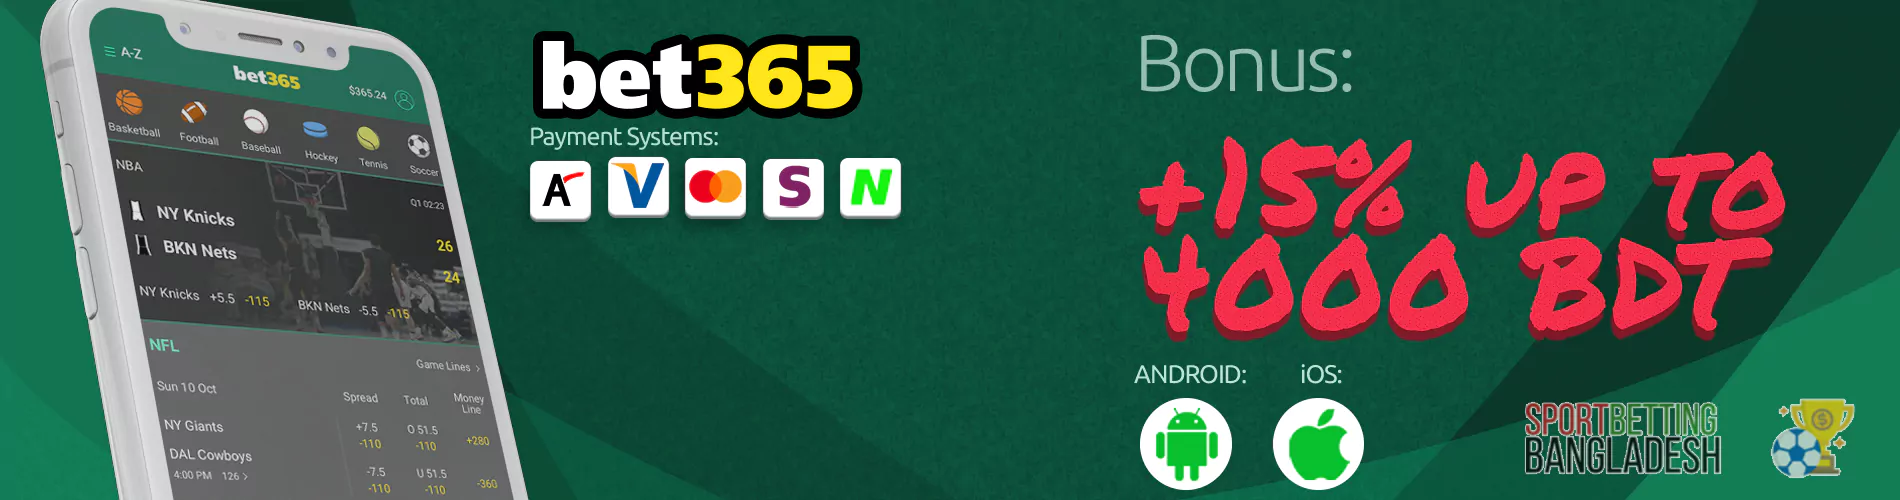 Bet365 Bangladesh app: payment systems, available platforms, welcome bonus.